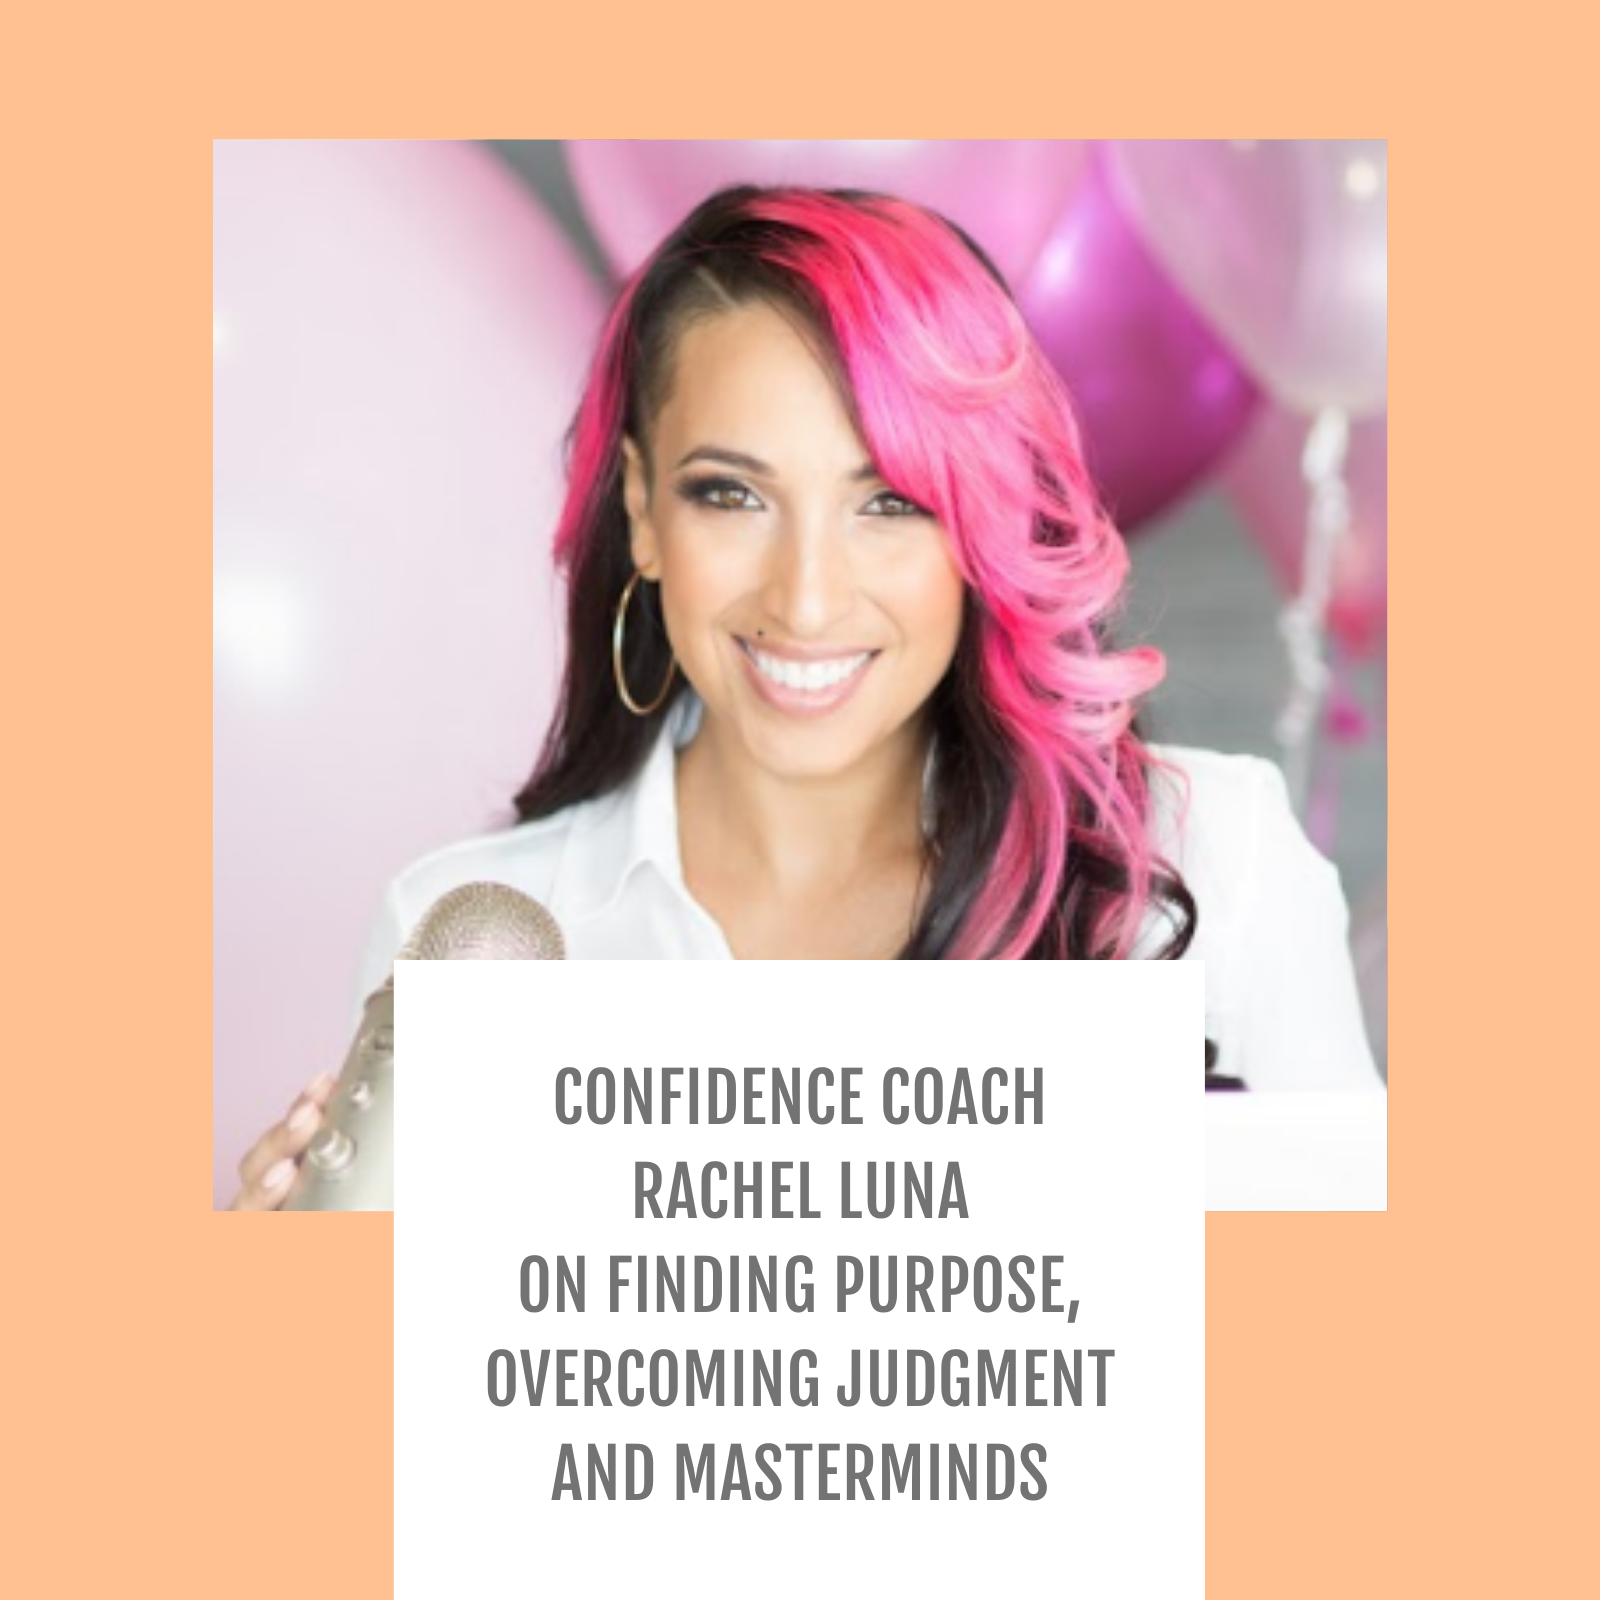 Episode #077-Confidence Coach Rachel Luna on Finding Purpose, Overcoming Judgment and Masterminds